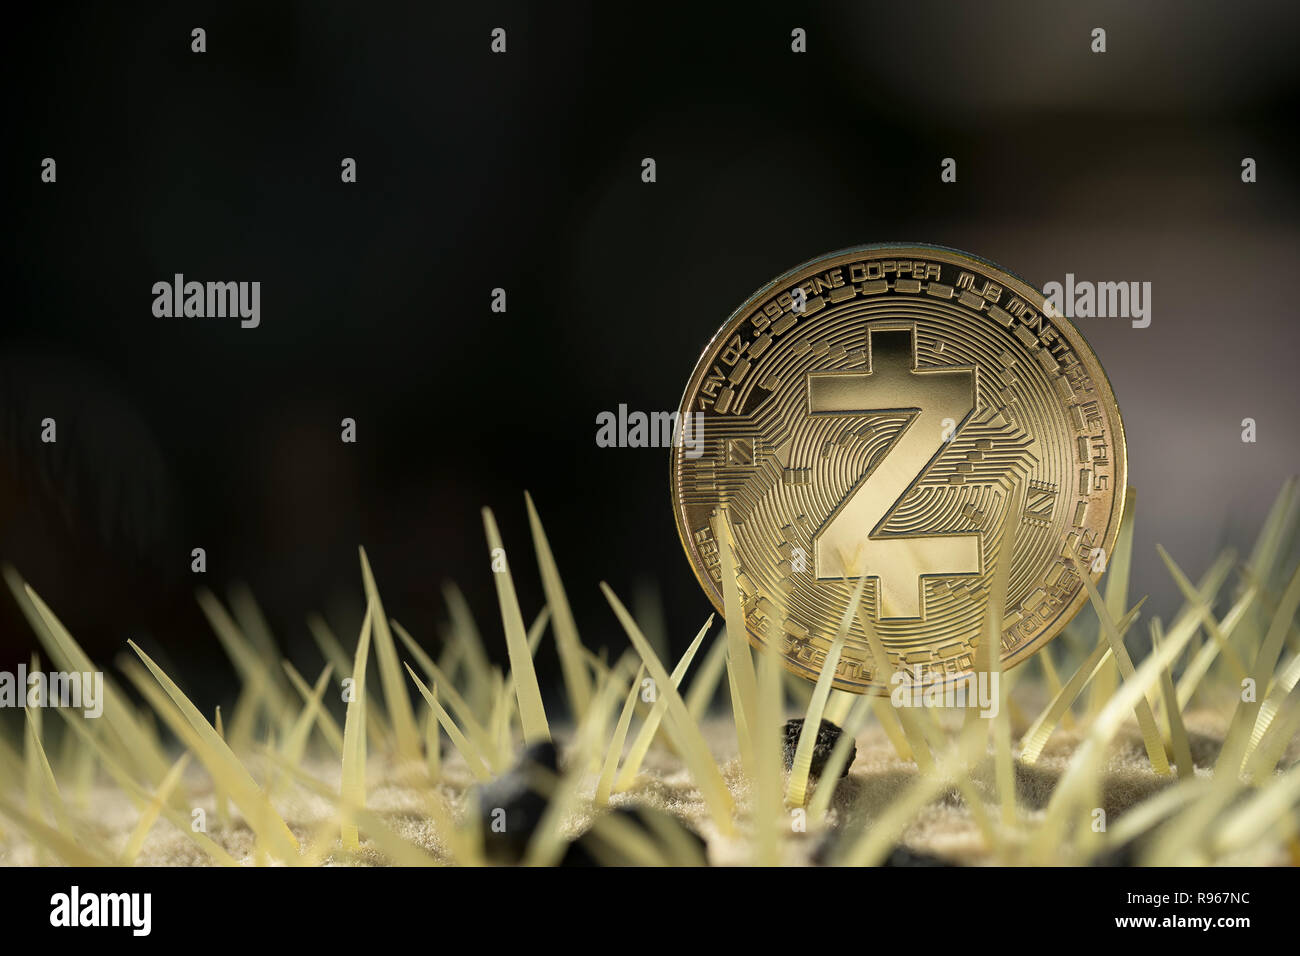 Z-Cash cryptocurrency physical coin placed between cactus spikes Stock Photo